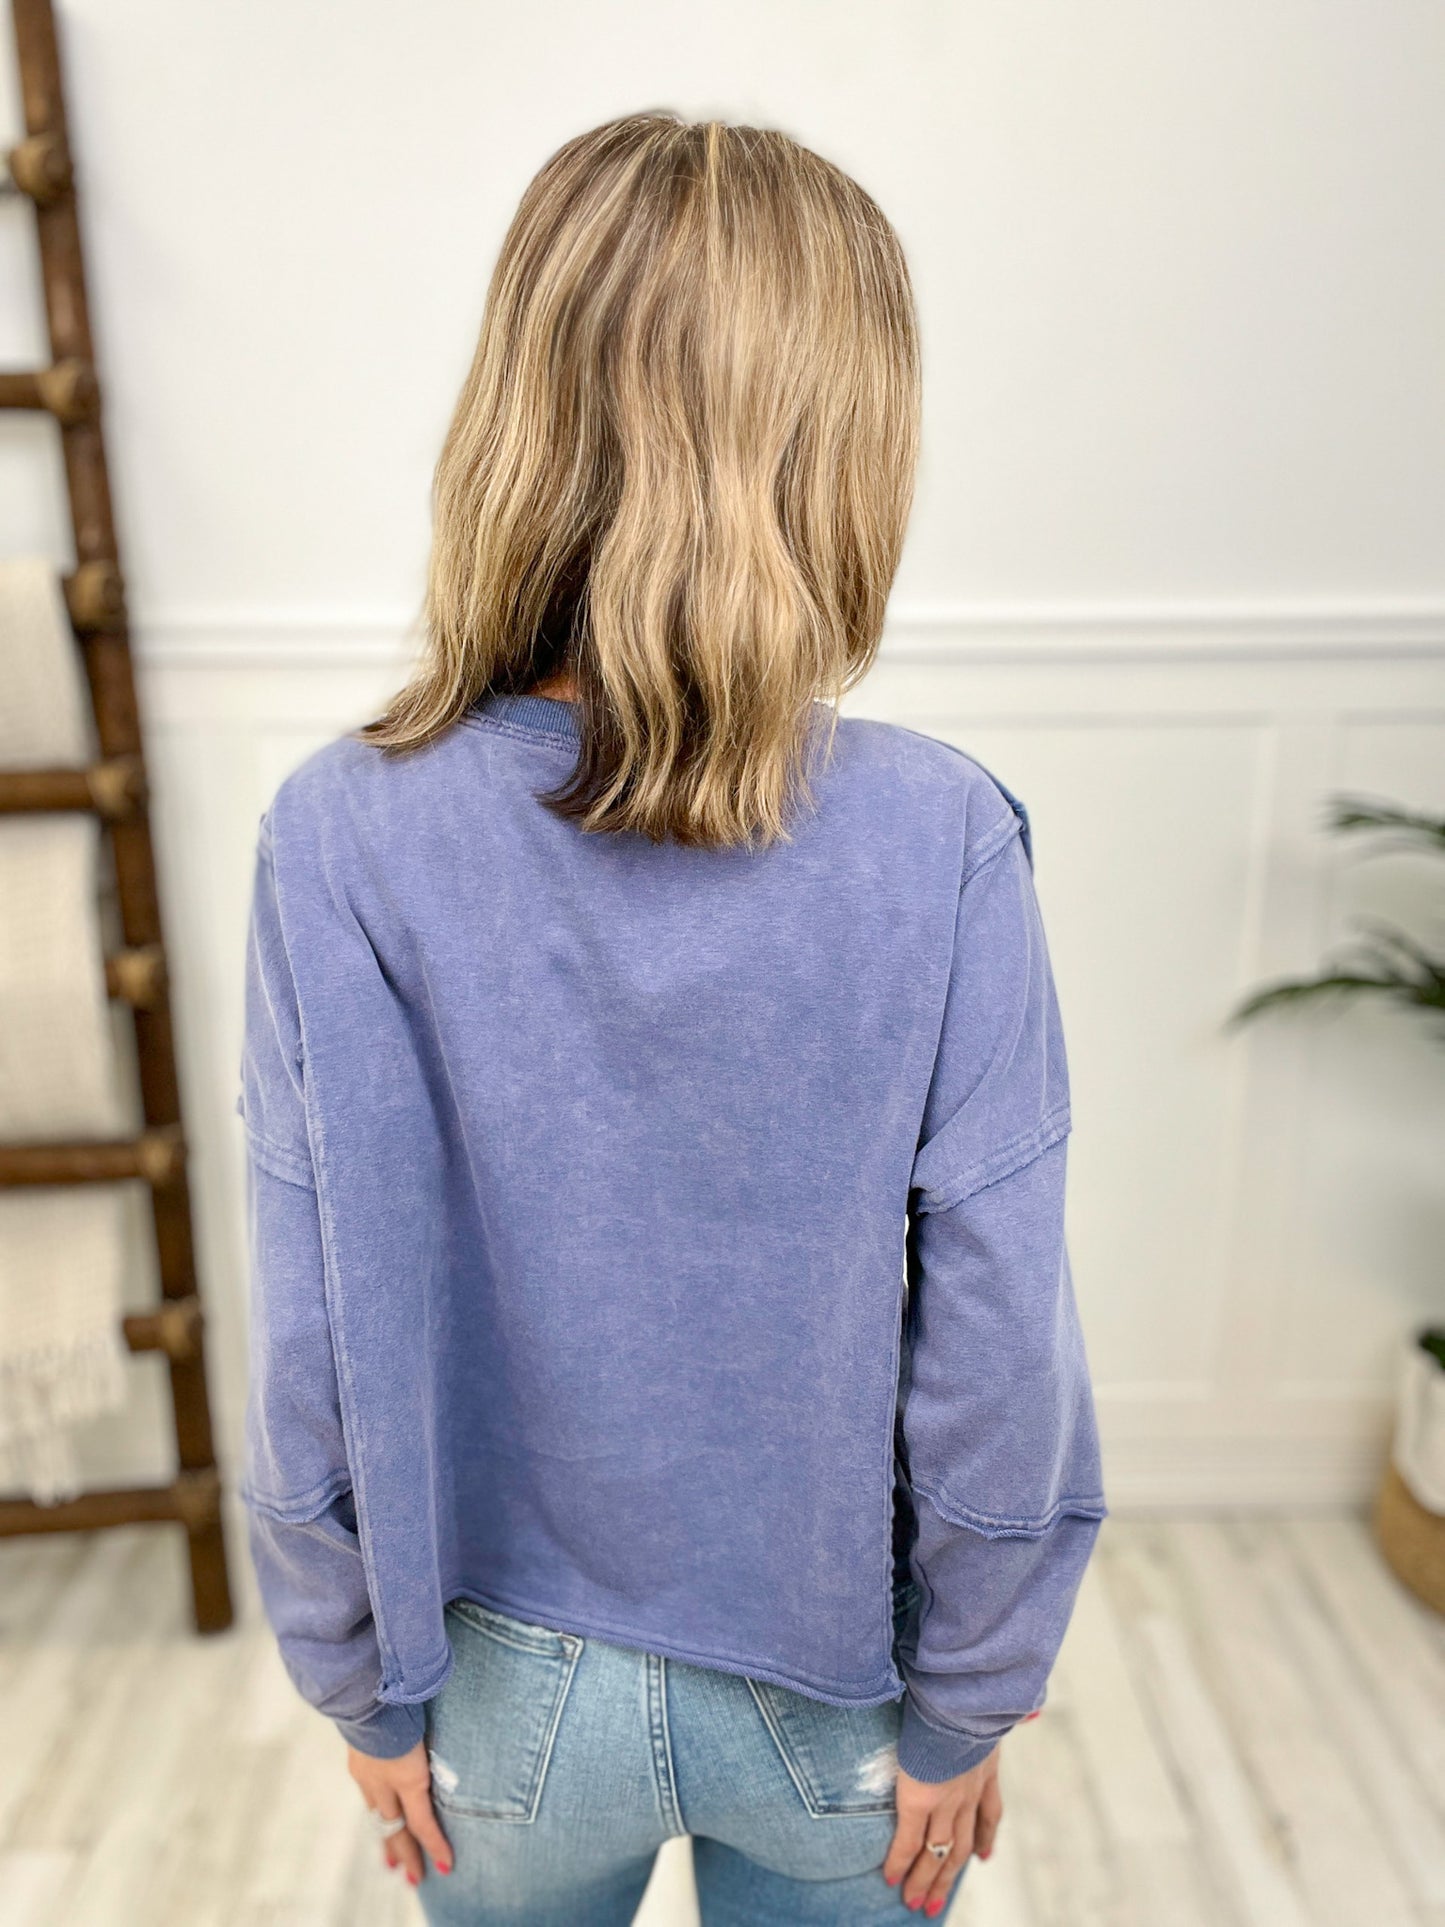 This Time Around Round Neck Long Sleeve Top